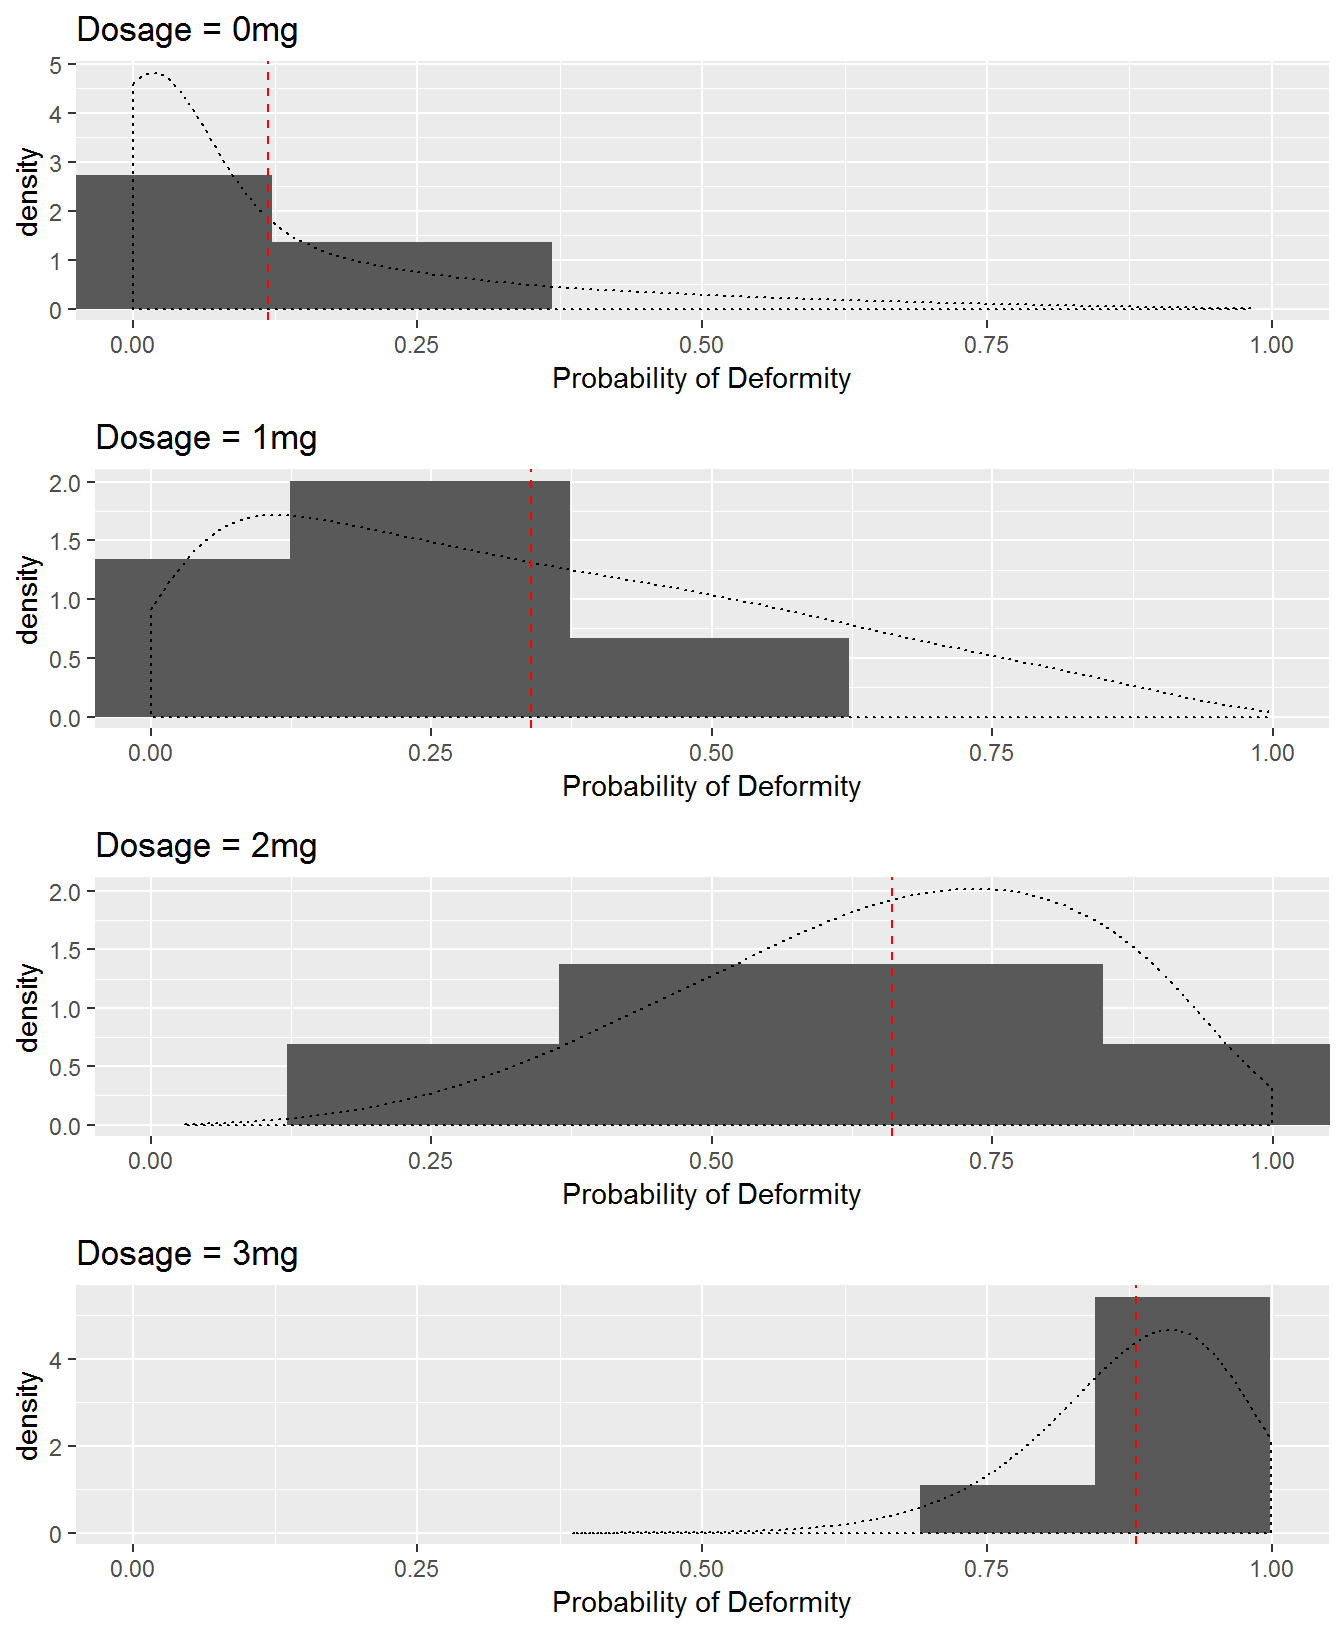 Observed (histograms) and theoretical (density curves) distributions of dams' probabilities of producing deformed pups by dose group in Scenario 2b.  The red vertical line represents the fixed probability of a deformed pup by dose group in Scenario 2a.